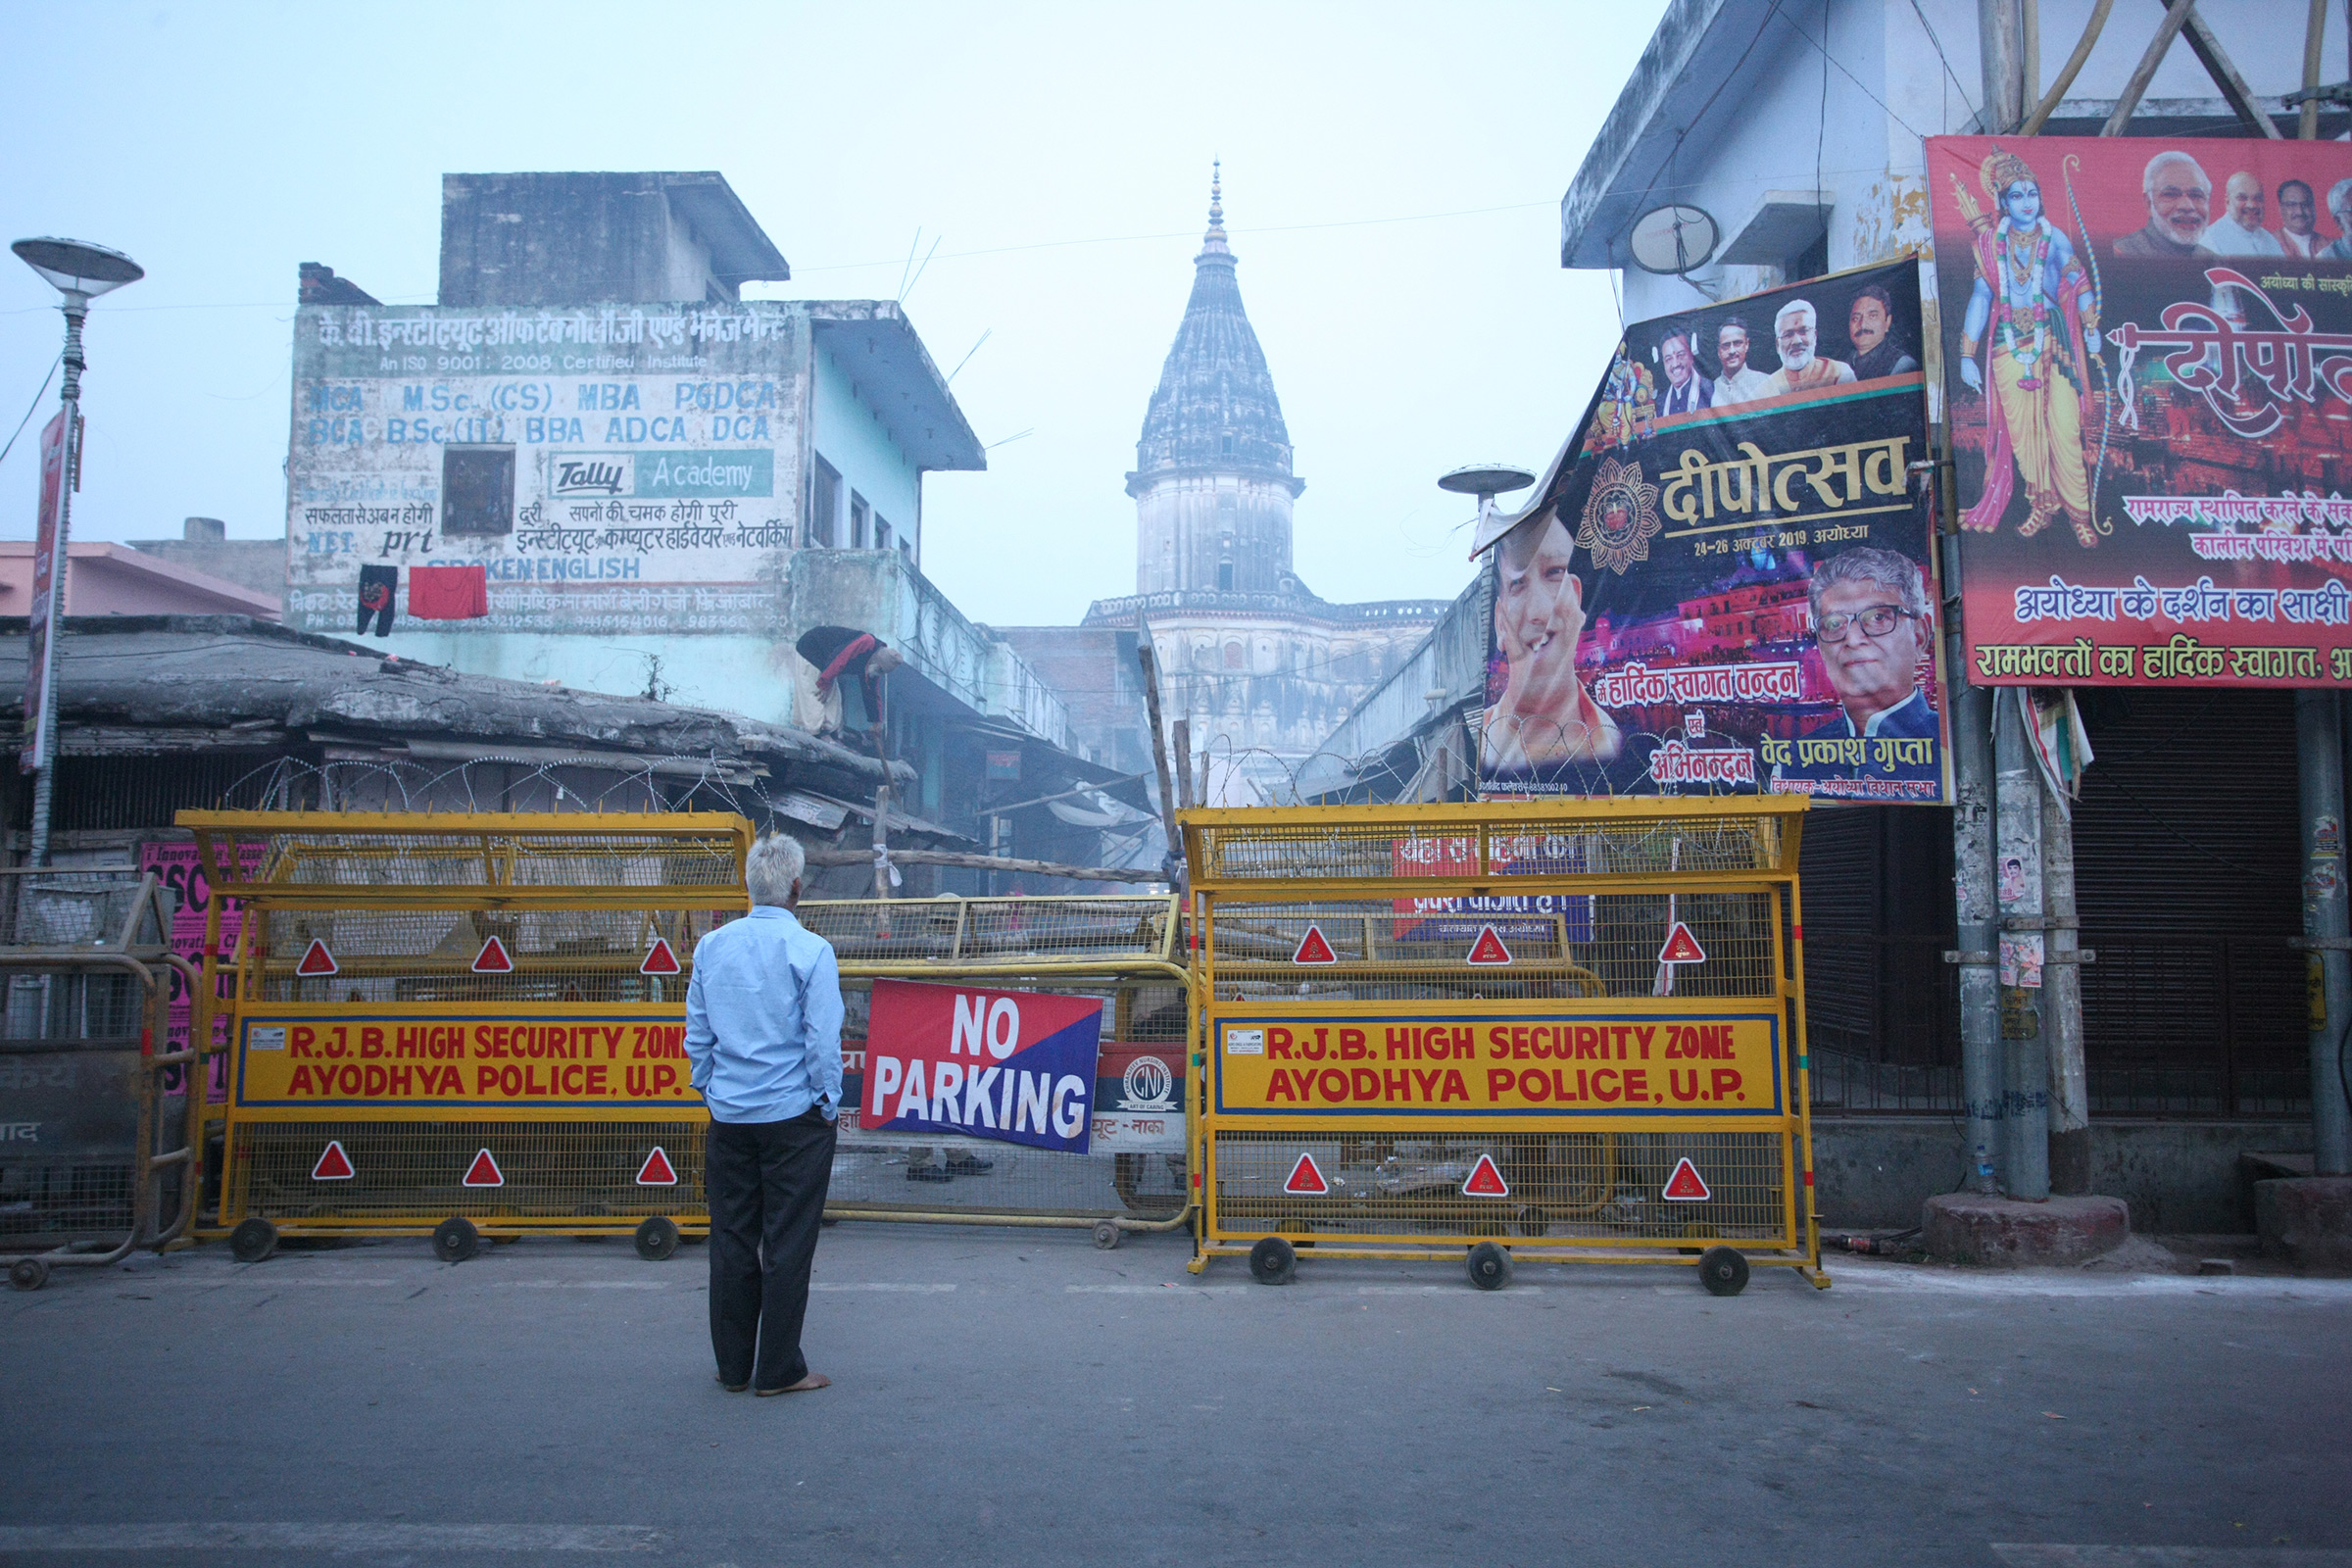 A local man looks on through barricade on street near Hanmuna Gadhi temple in Ayodhya on Nov. 9, 2019, ahead of a Supreme Court verdict on the future of a disputed religious site in the holy city.